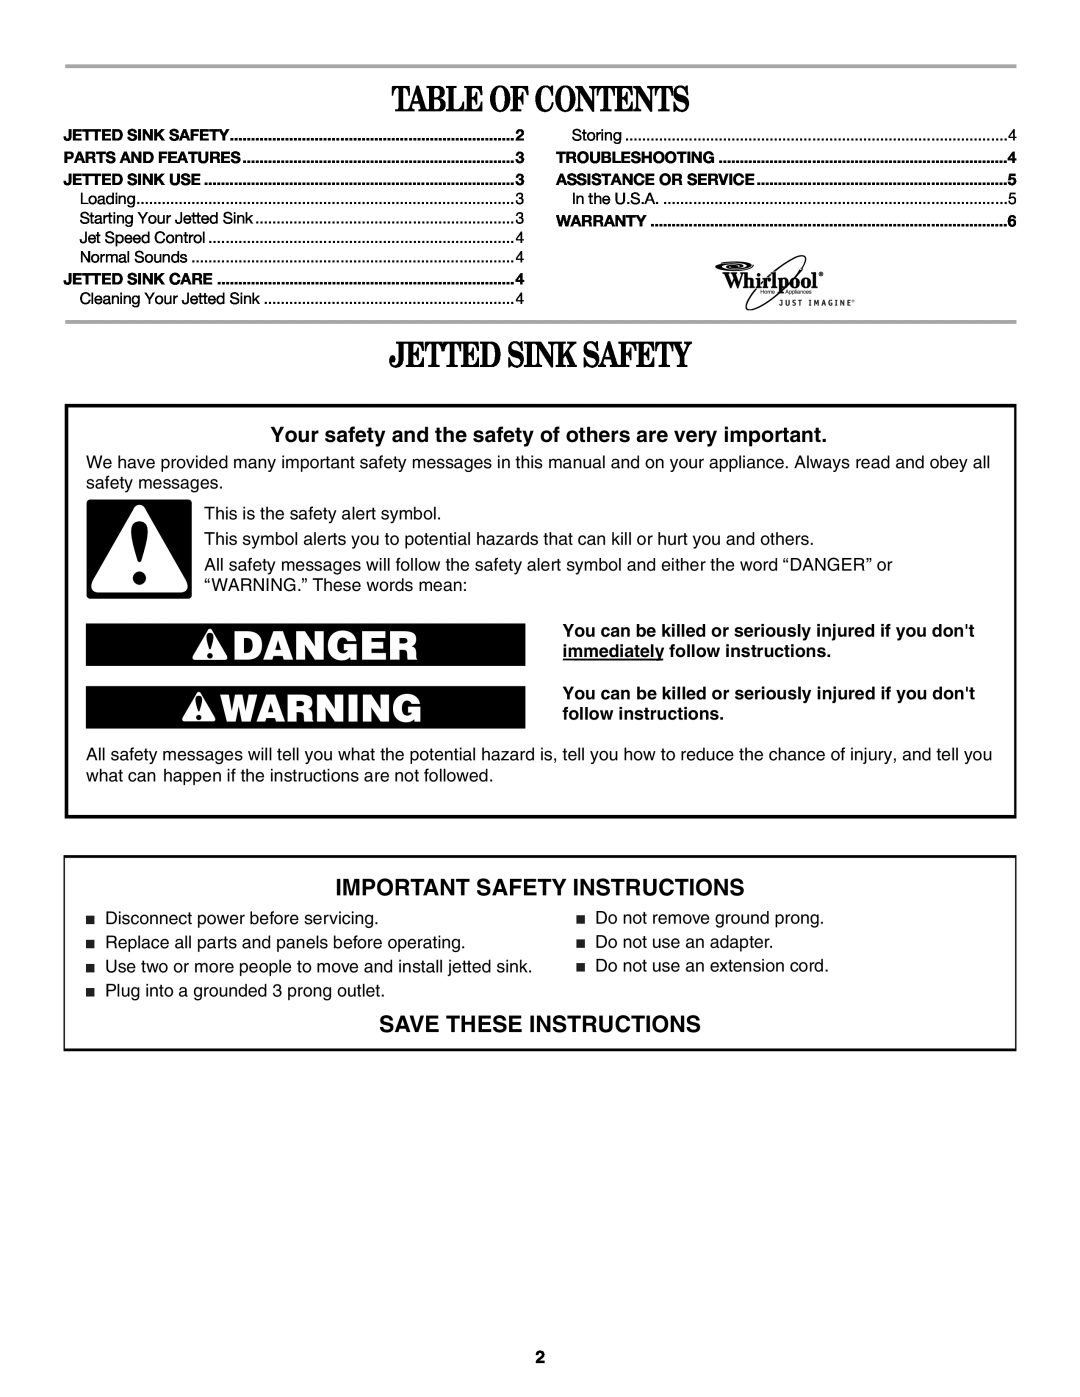 Whirlpool manual Table Of Contents, Jetted Sink Safety, Important Safety Instructions, Save These Instructions 